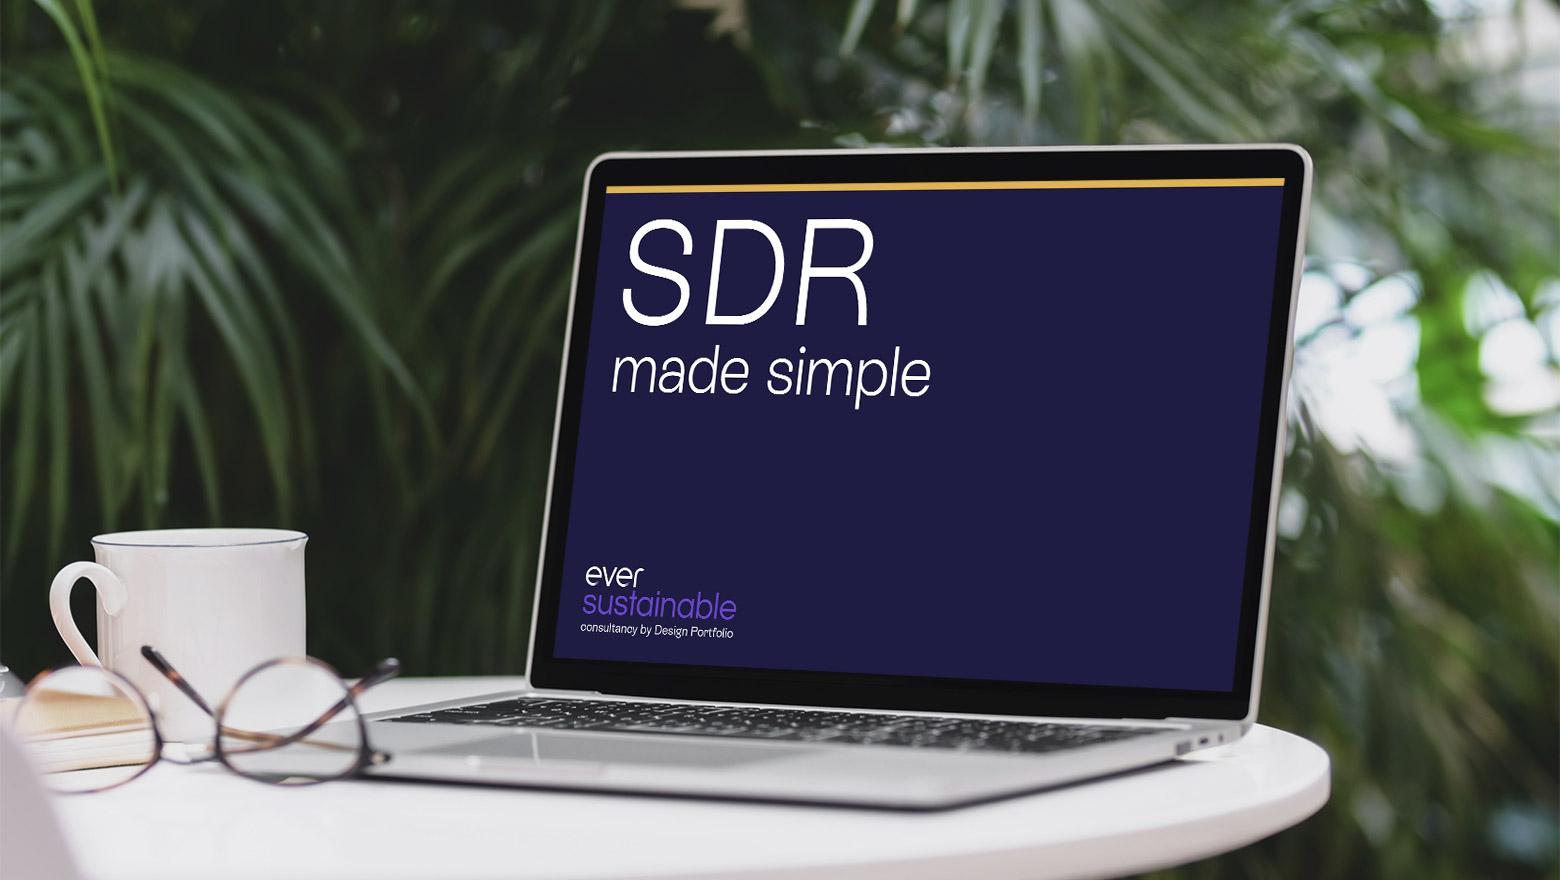 Sustainability Disclosure Requirements (SDR) made simple factsheet